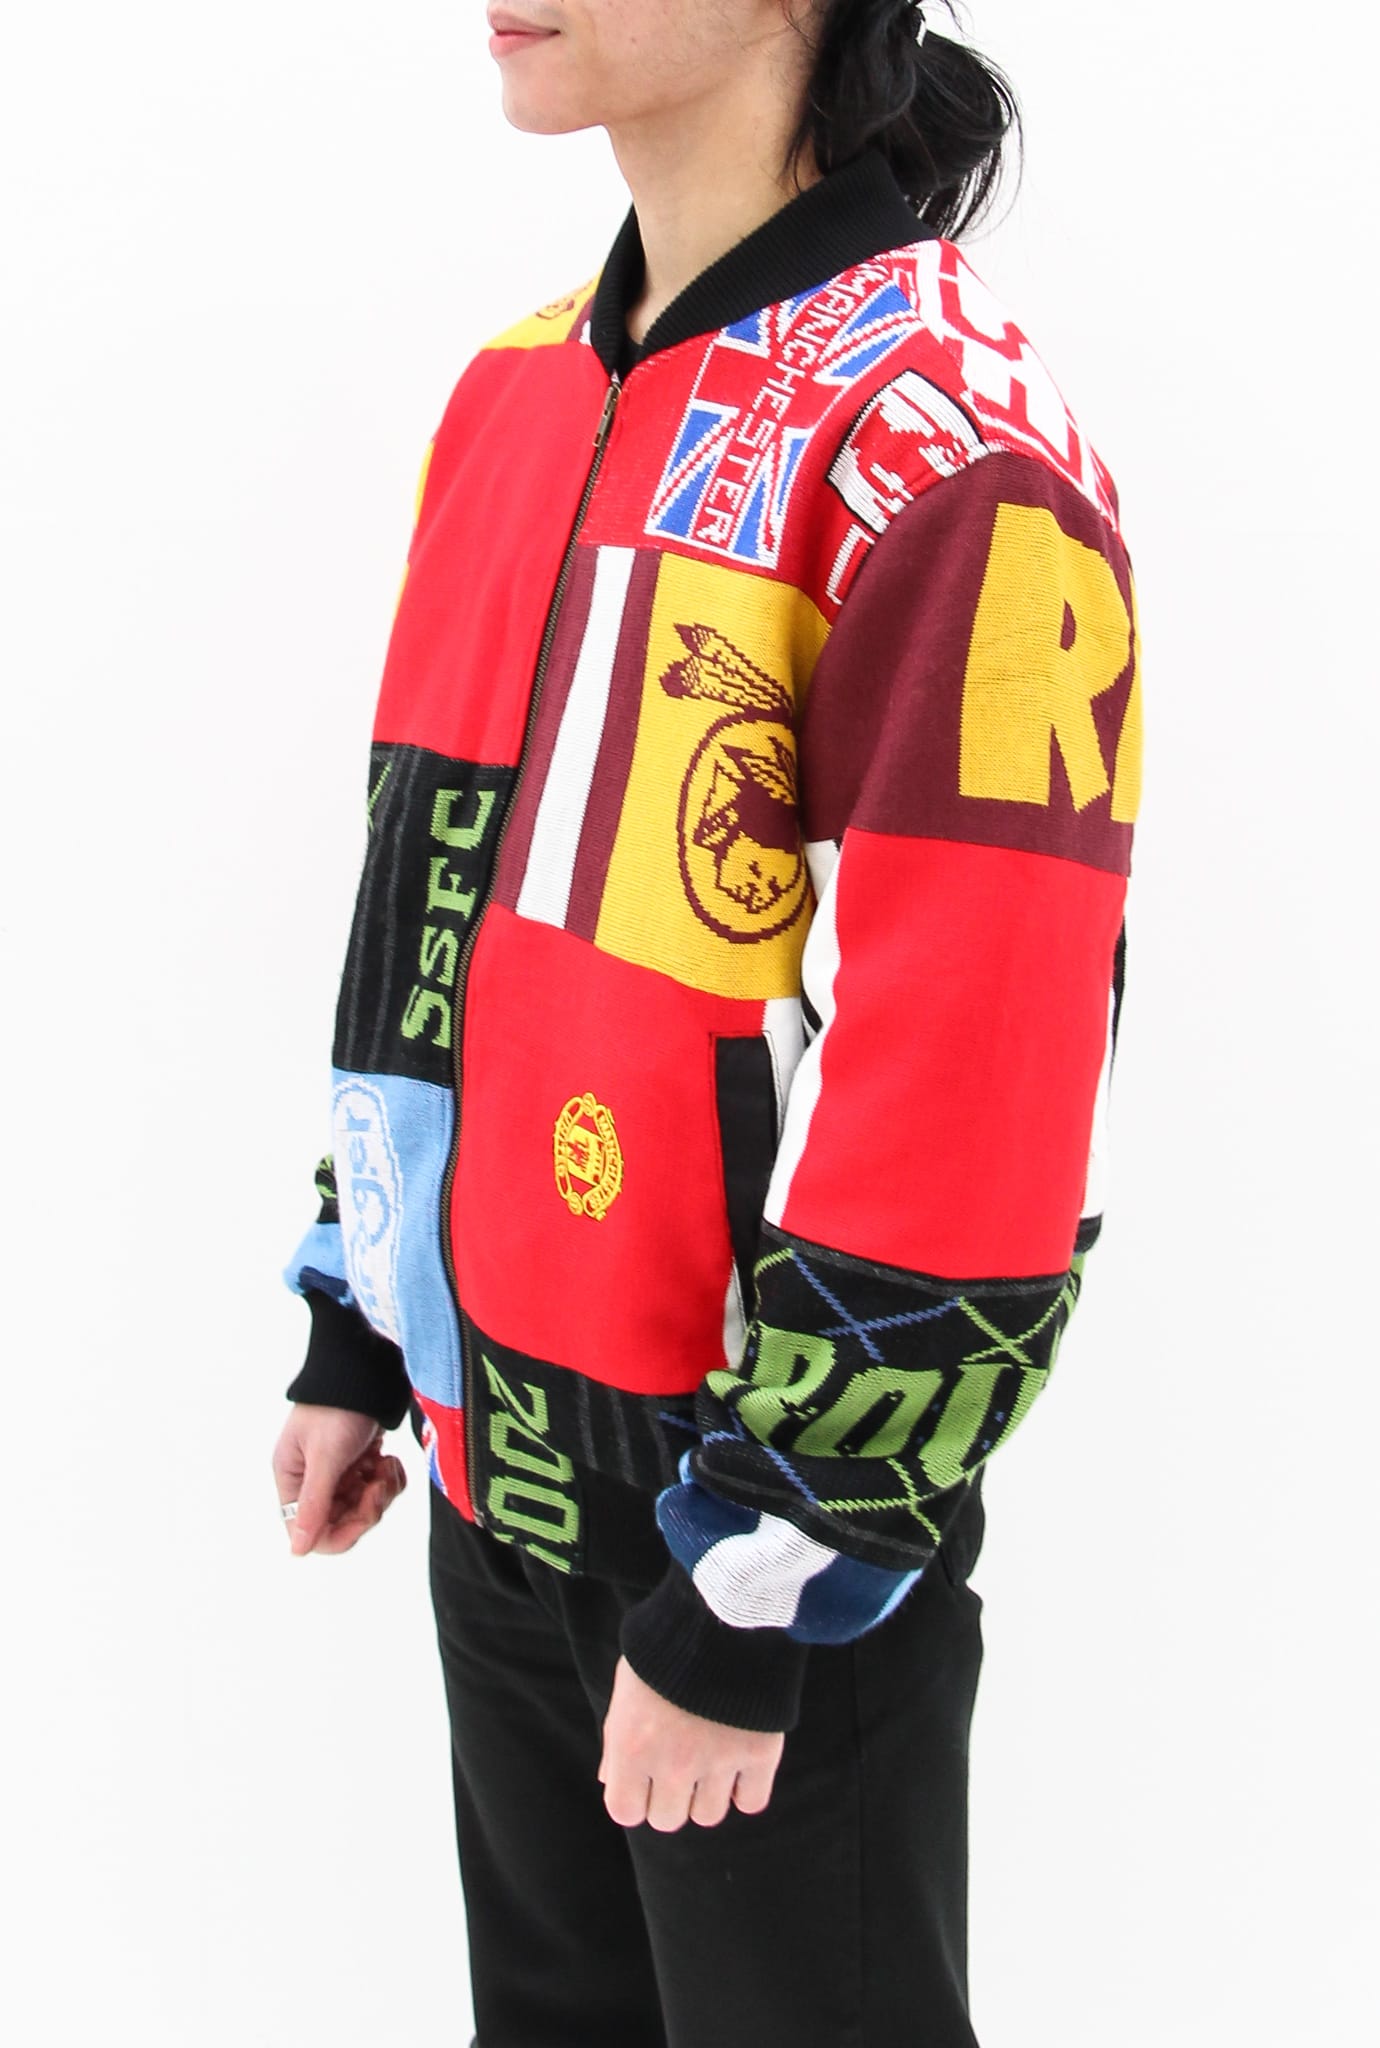 AM Re-Worked Football Scarf Jacket #9 - American Madness